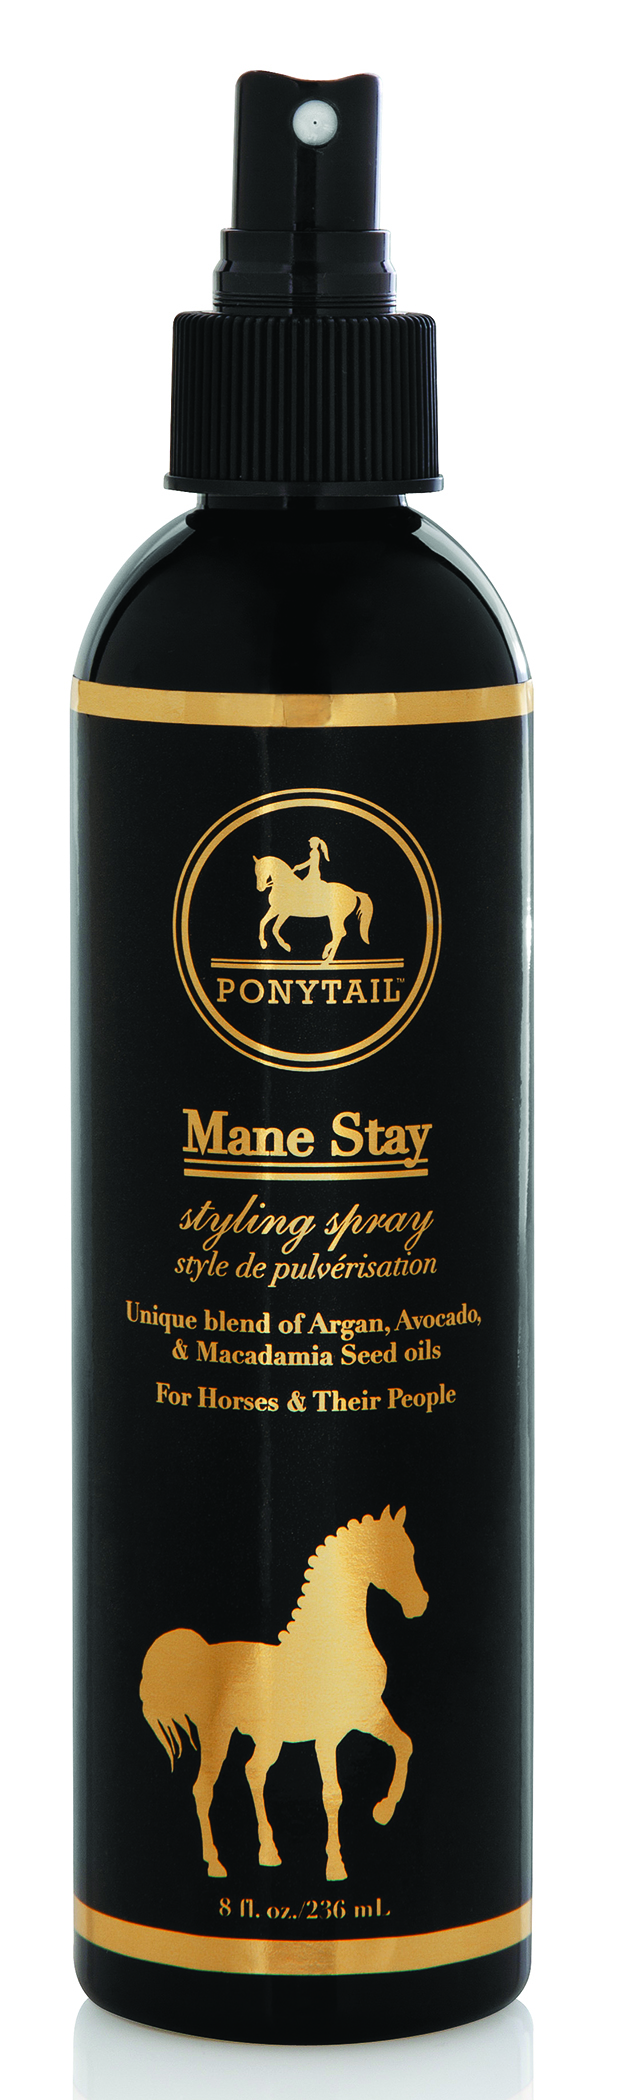 MANE STAY STYLING SPRAY FOR HORSES